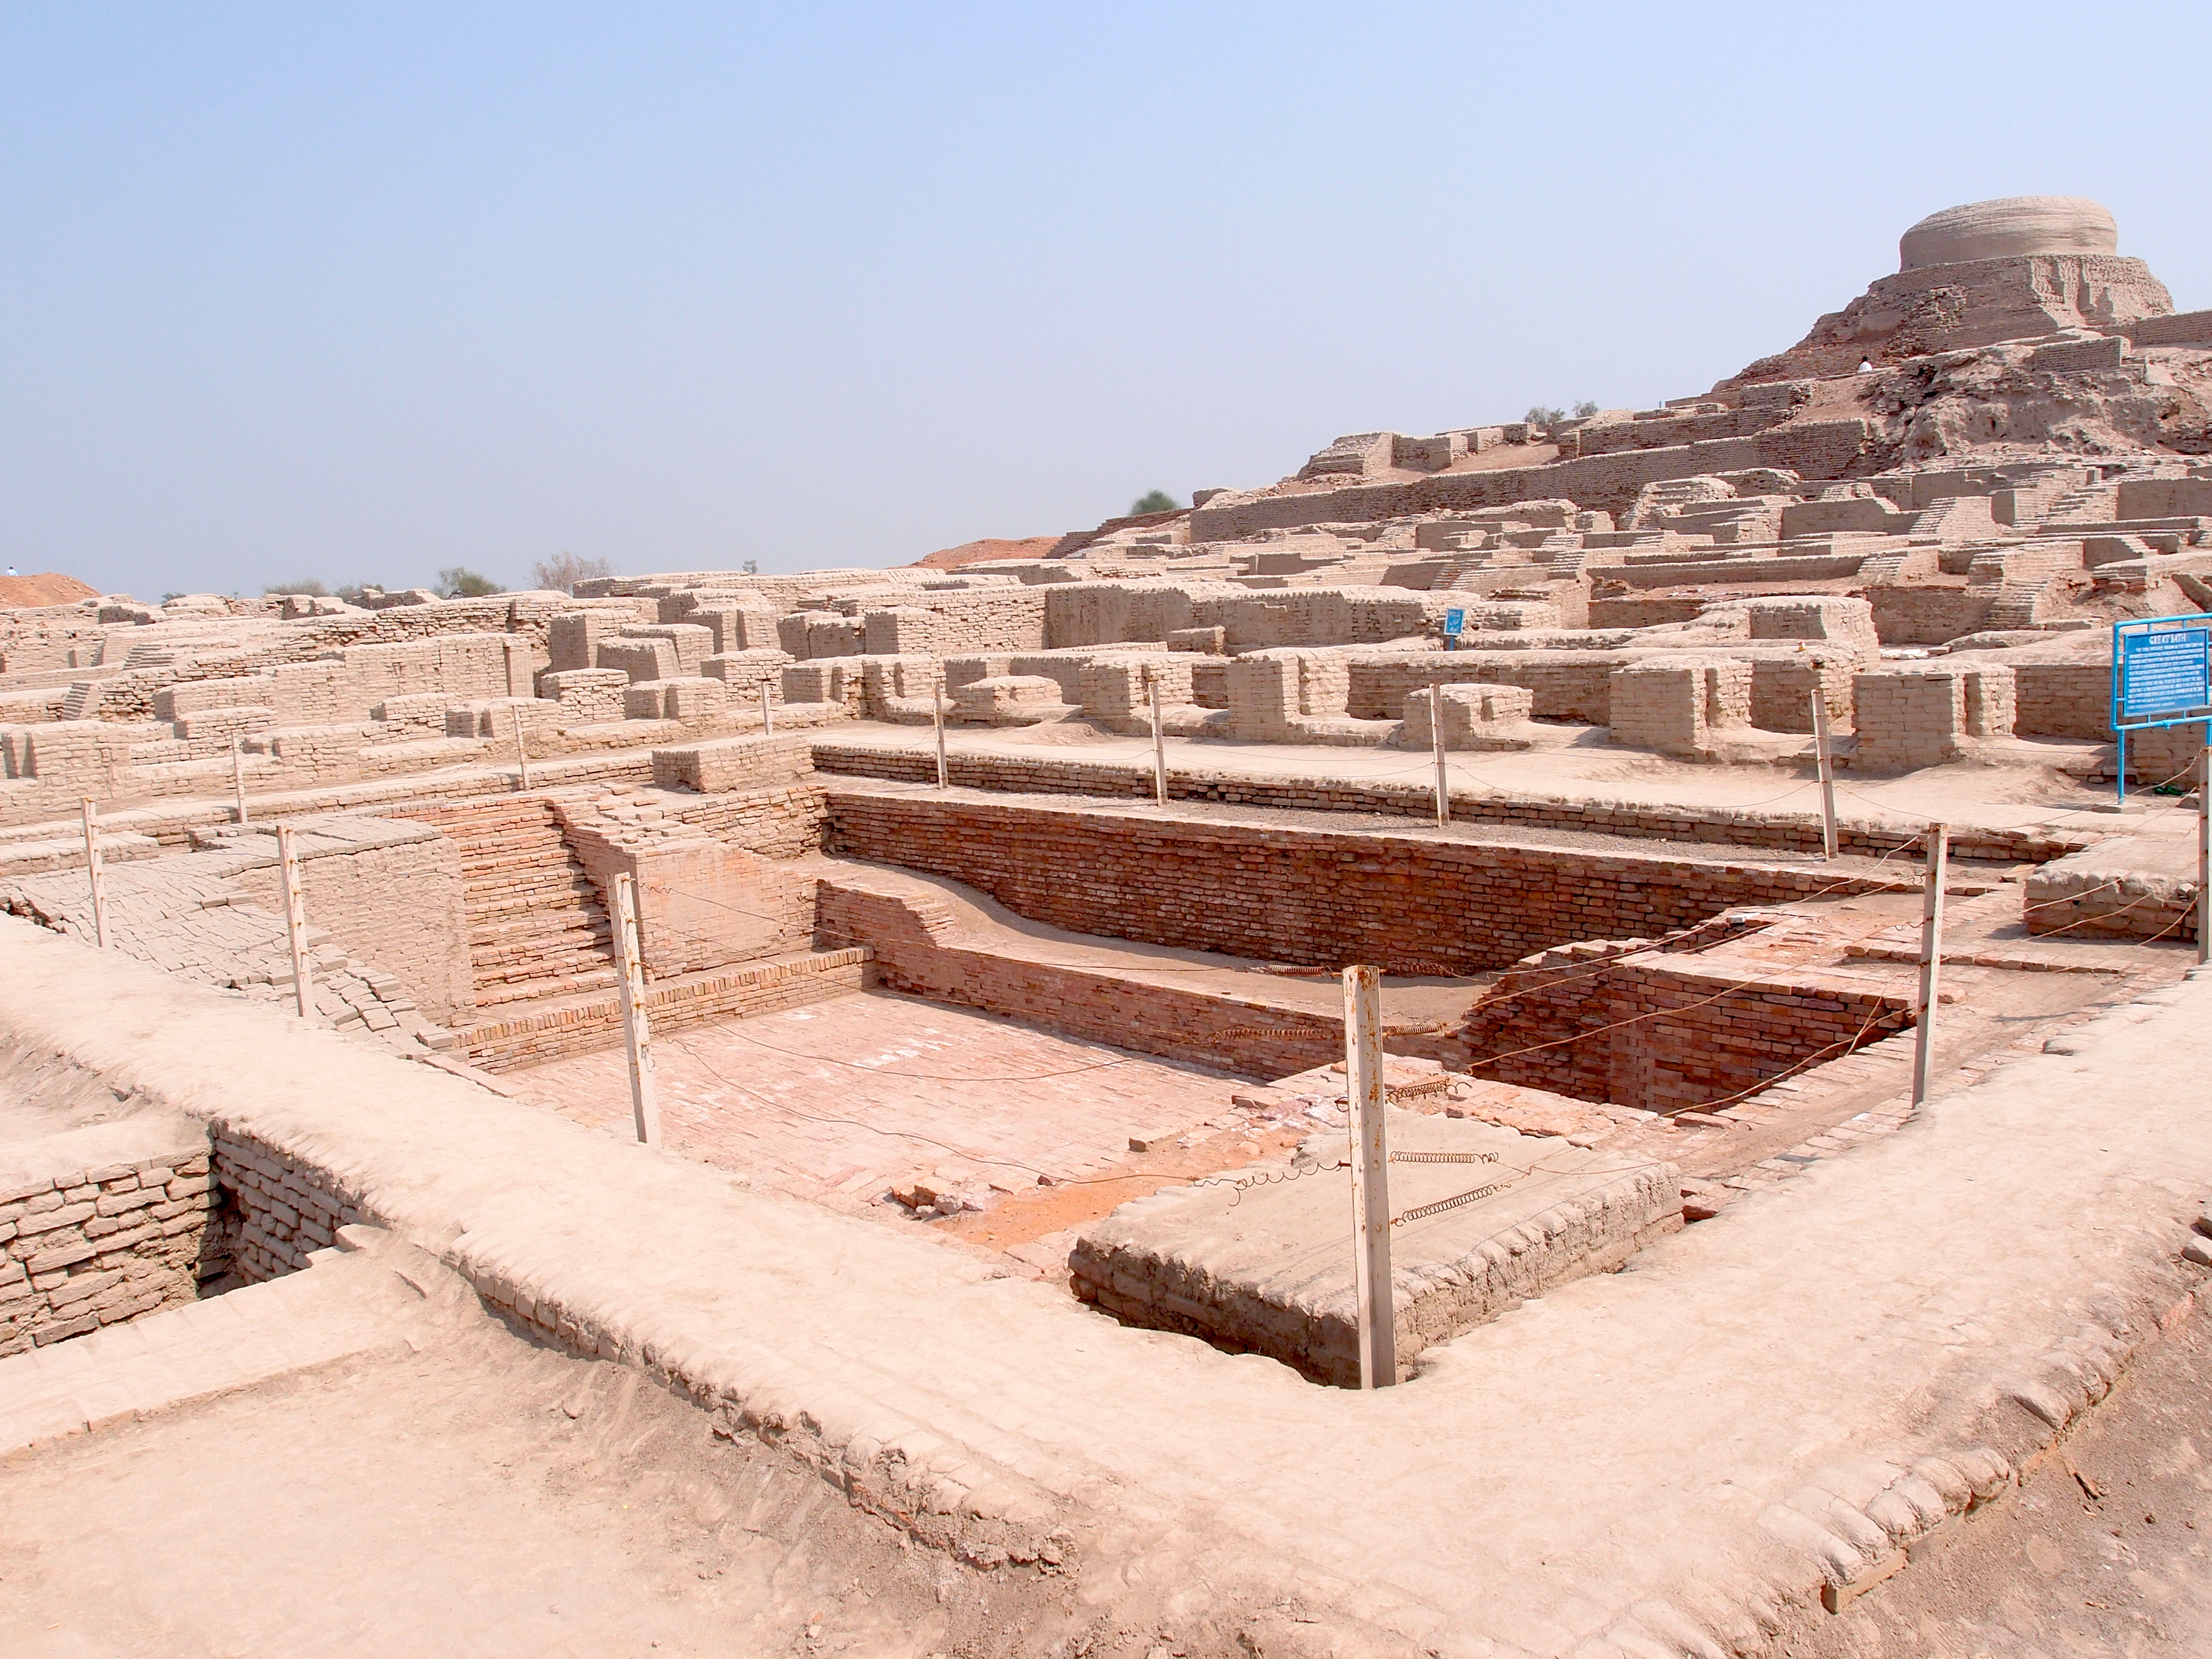 the Great Bath in the foreground of the remaining ancient ruins of Mohenjo Daro